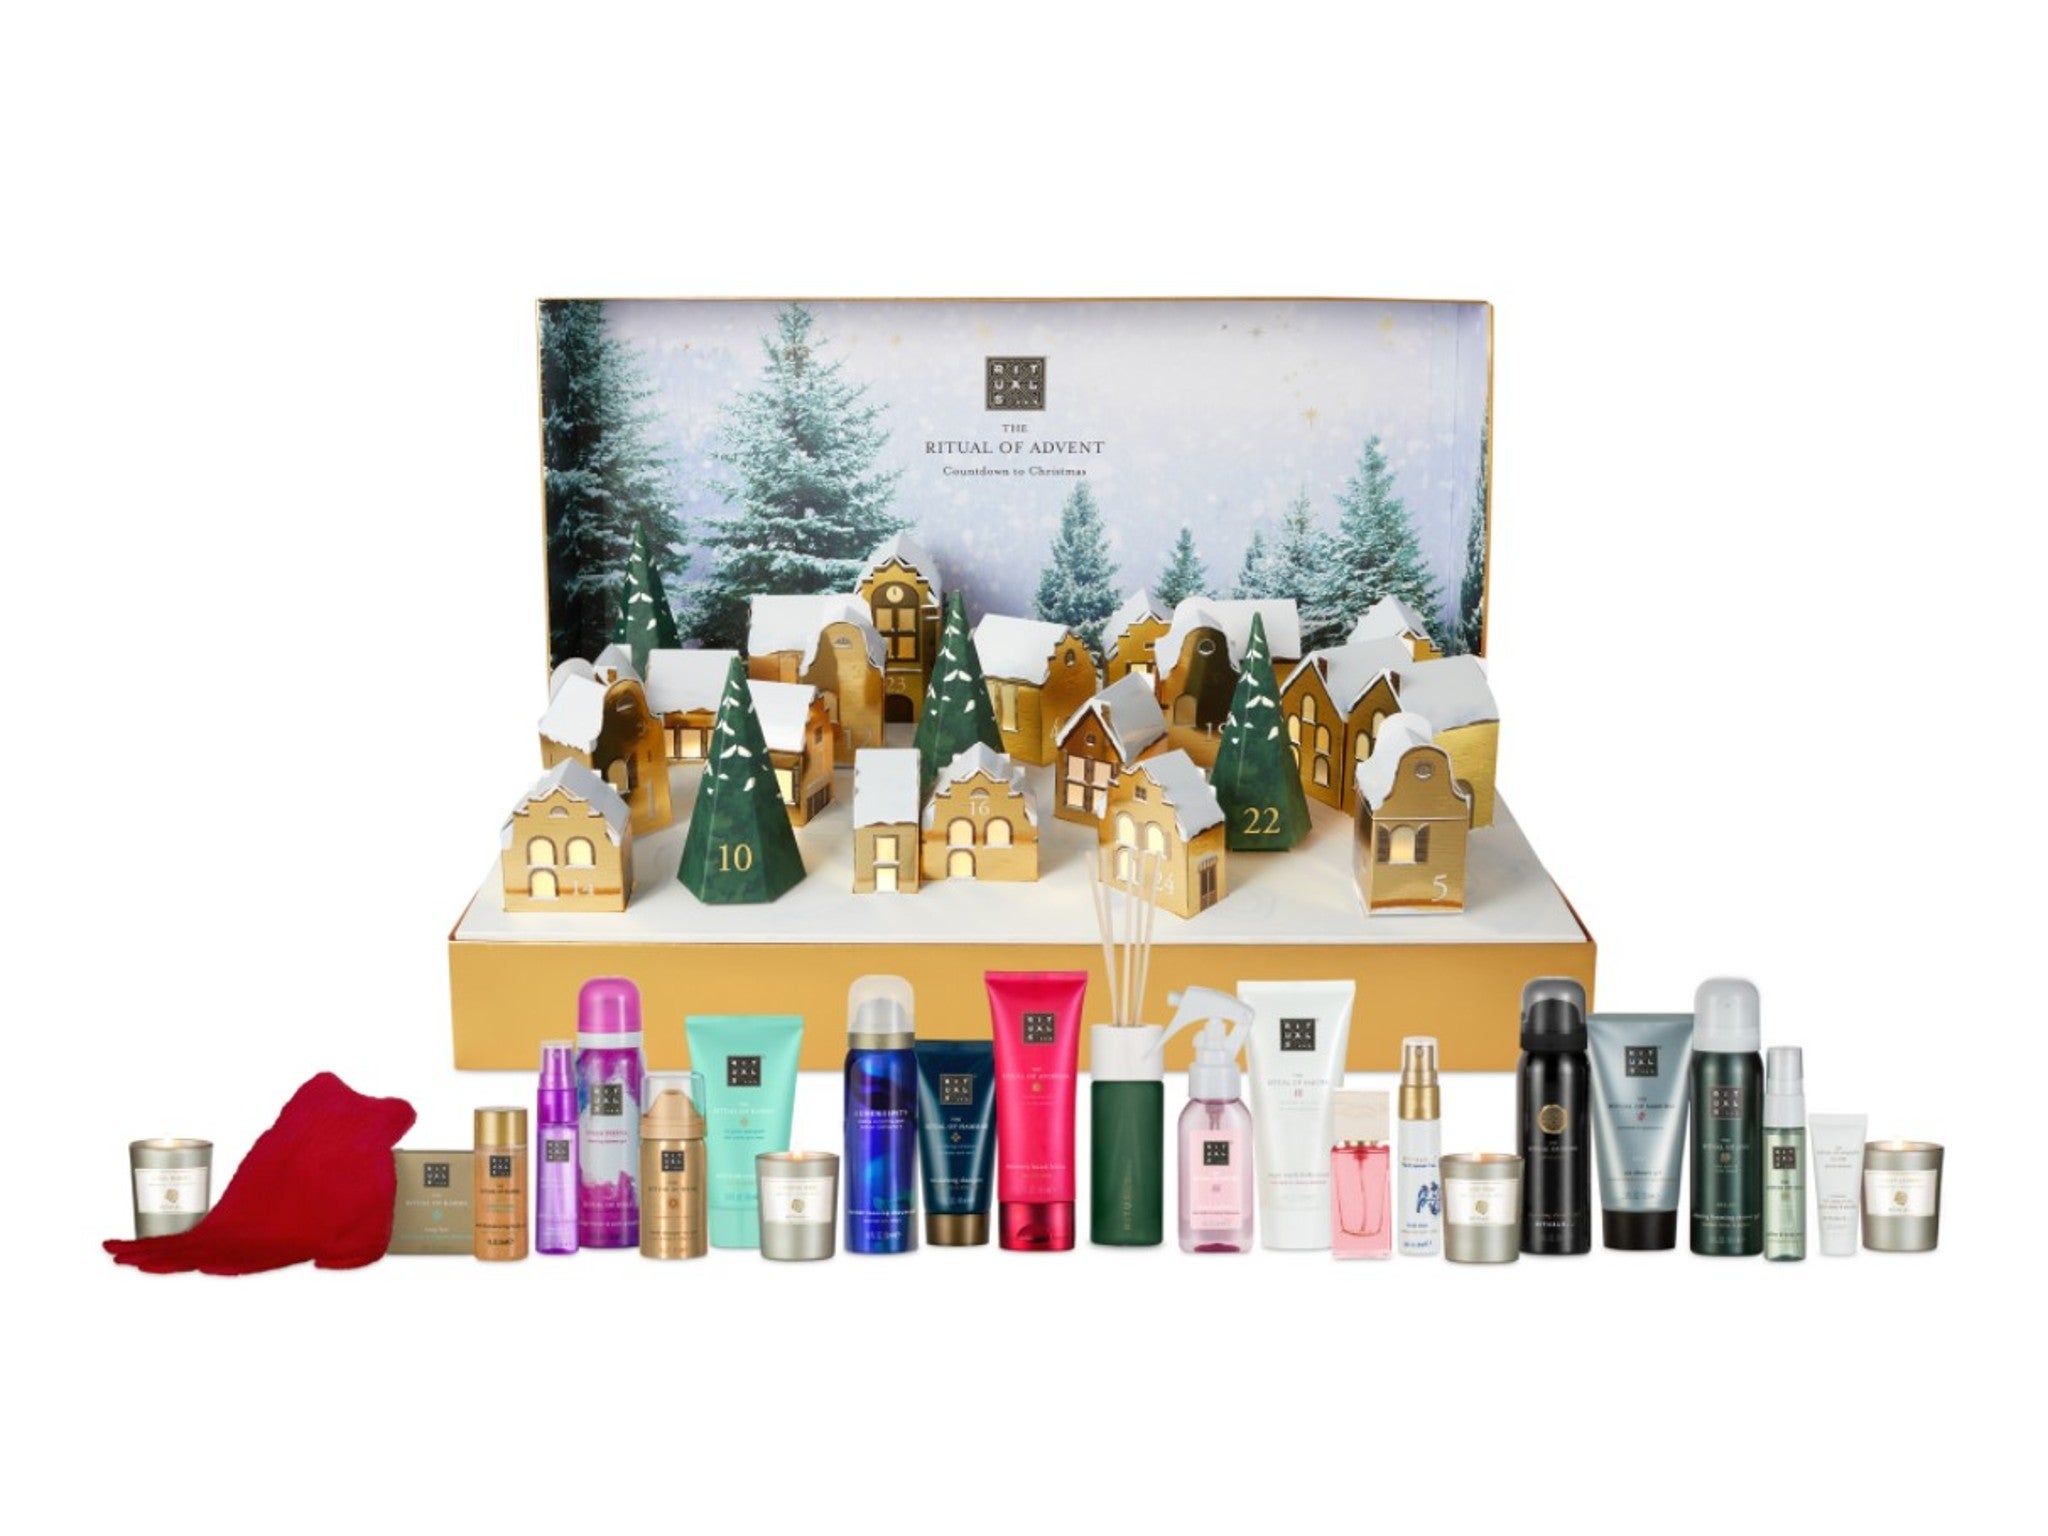 free post in UK Large Luxury Pop up 3-D Christmas Advent Calendars 